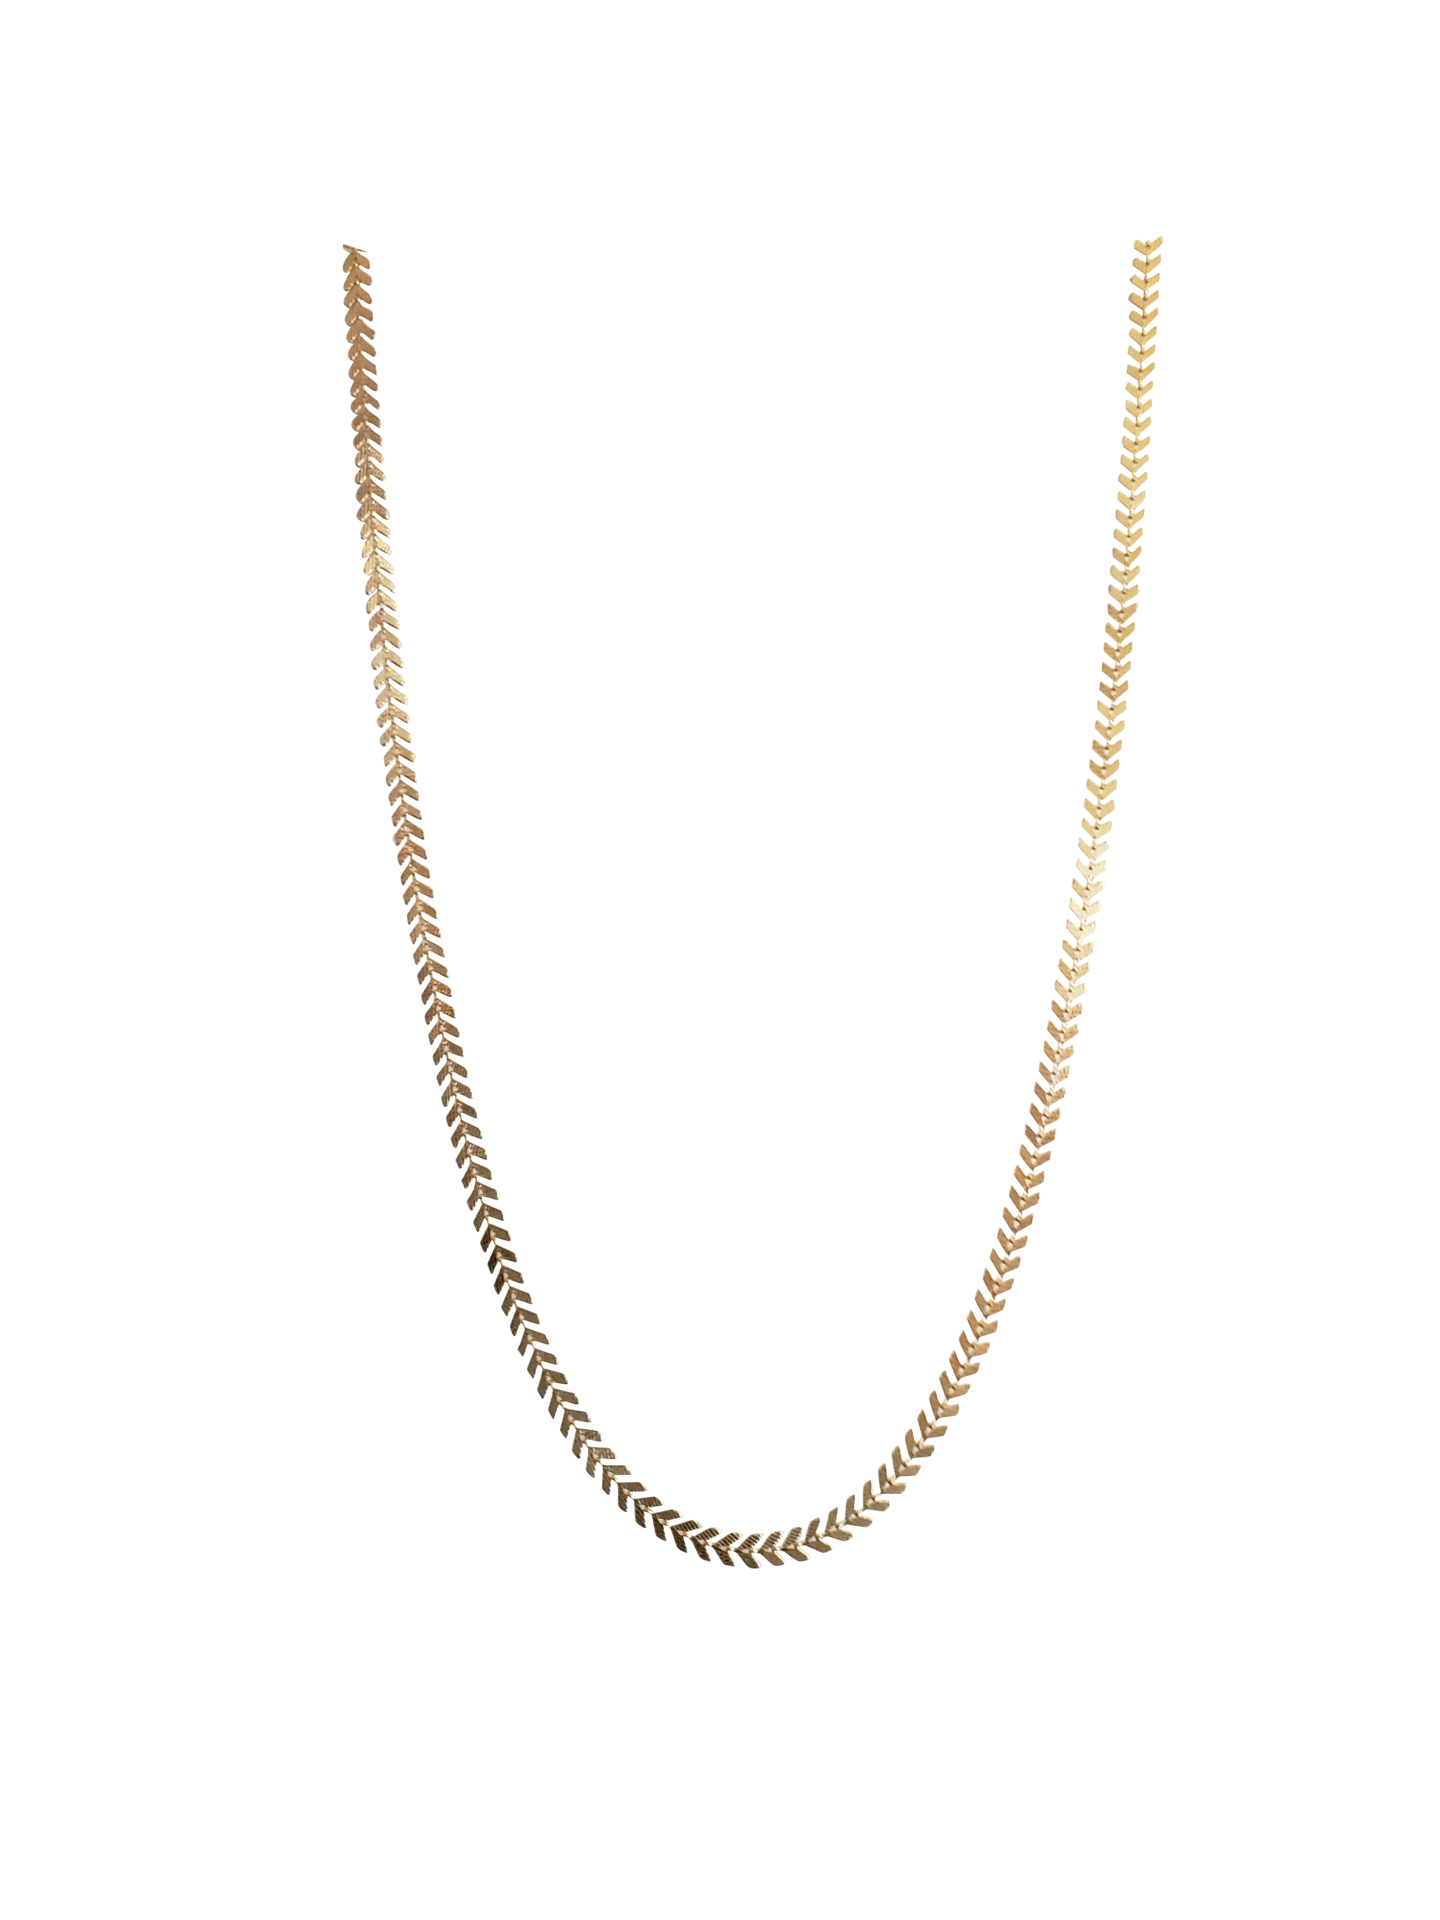 Necklace PNGs for Free Download